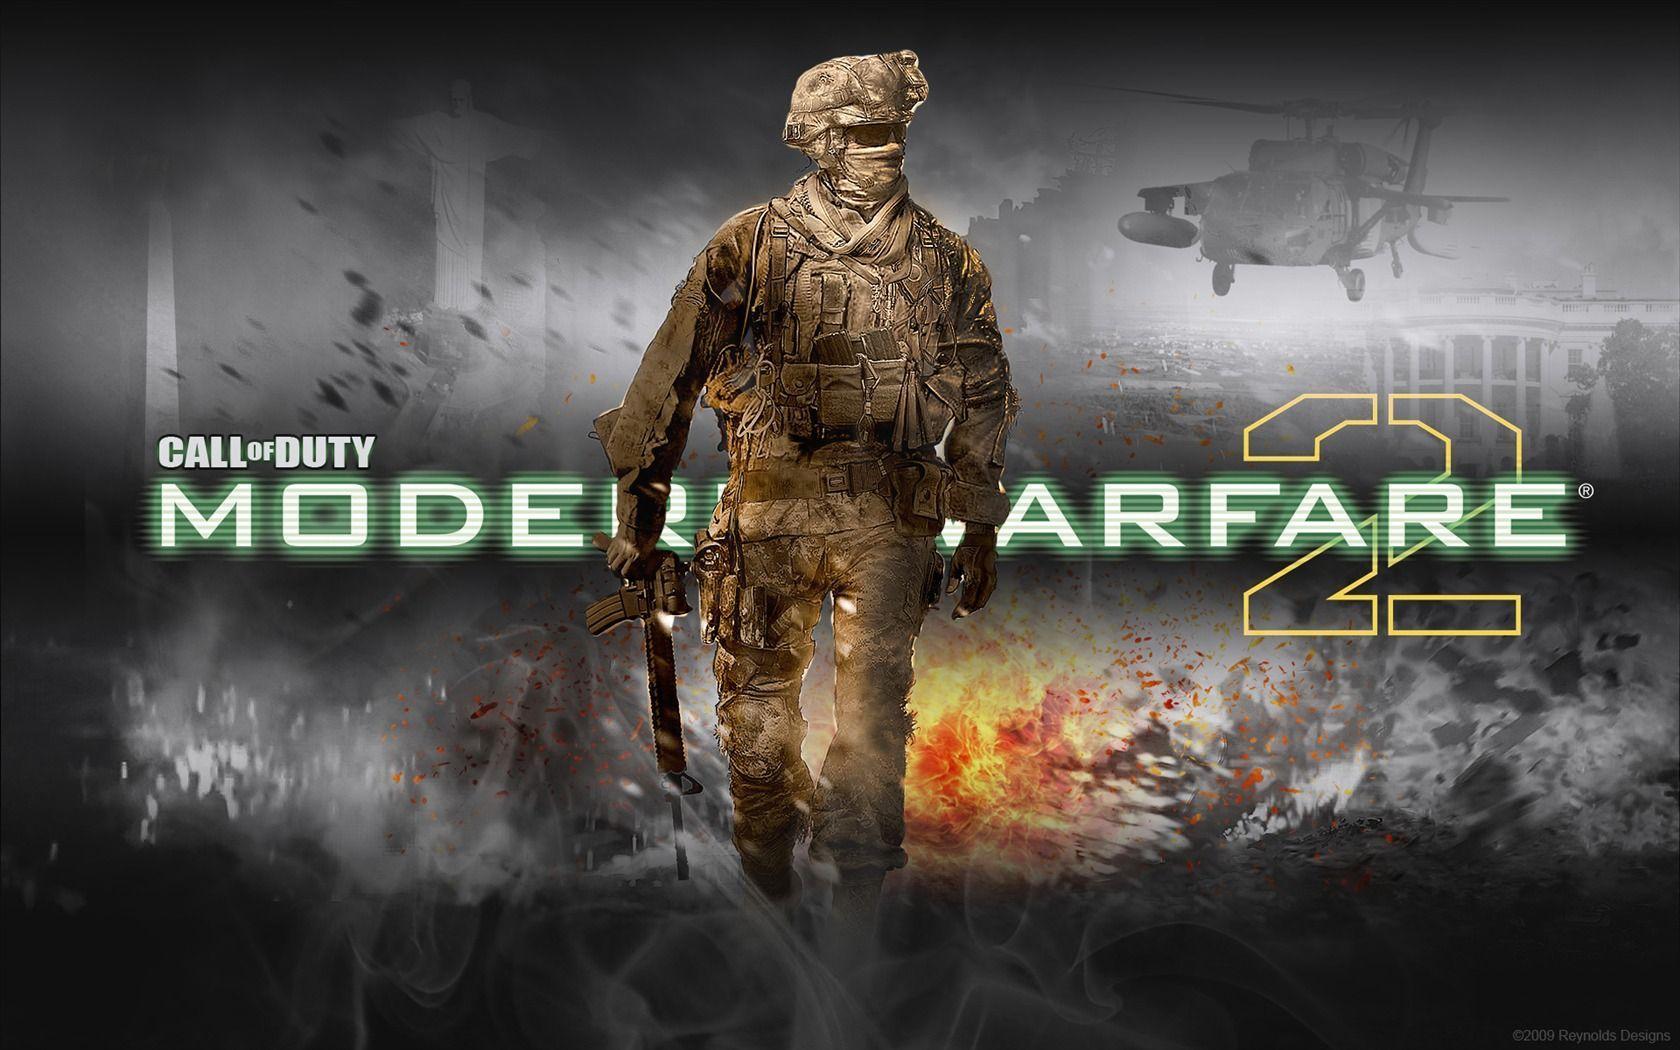 Call of Duty Modern Warfare 2 soldiers wallpaper  Game wallpapers  54422